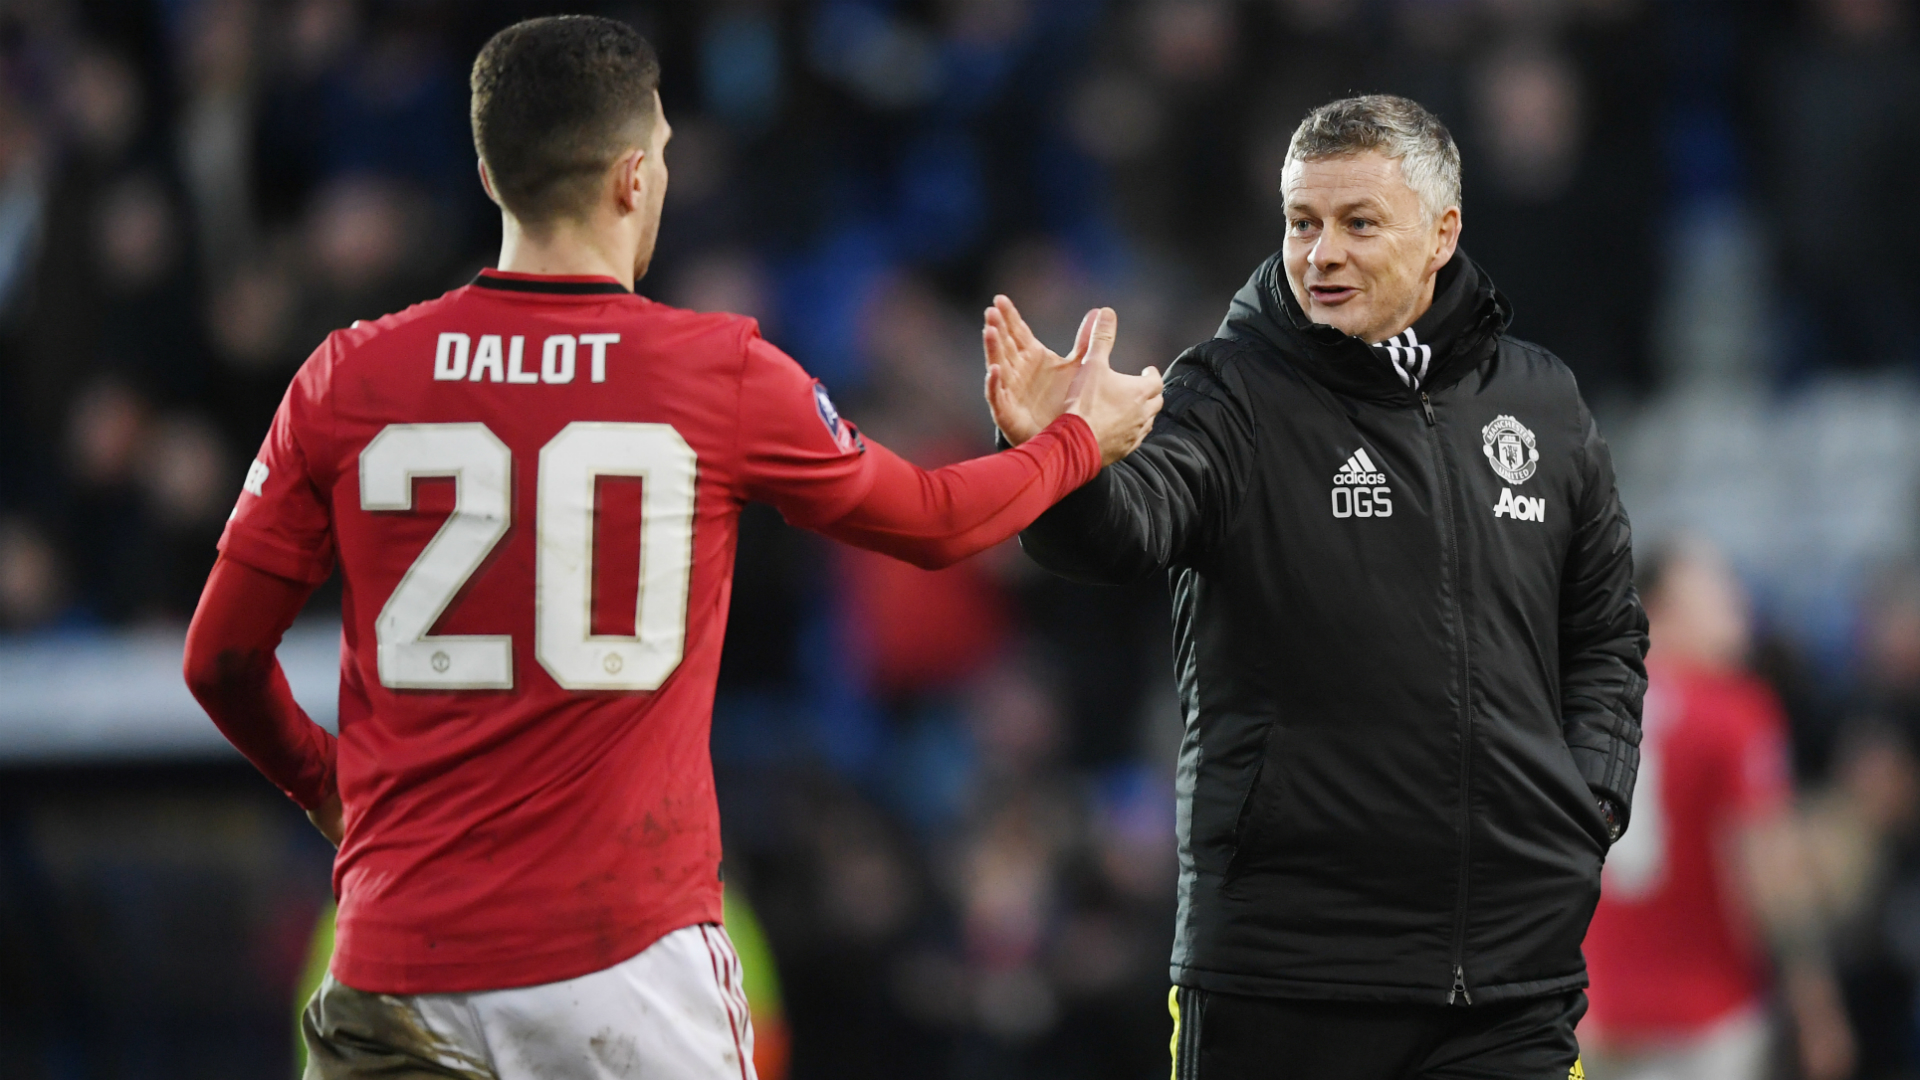 Injuries have limited Diogo Dalot's progress at Manchester United, but Sunday's goal against Tranmere Rovers was a positive step.